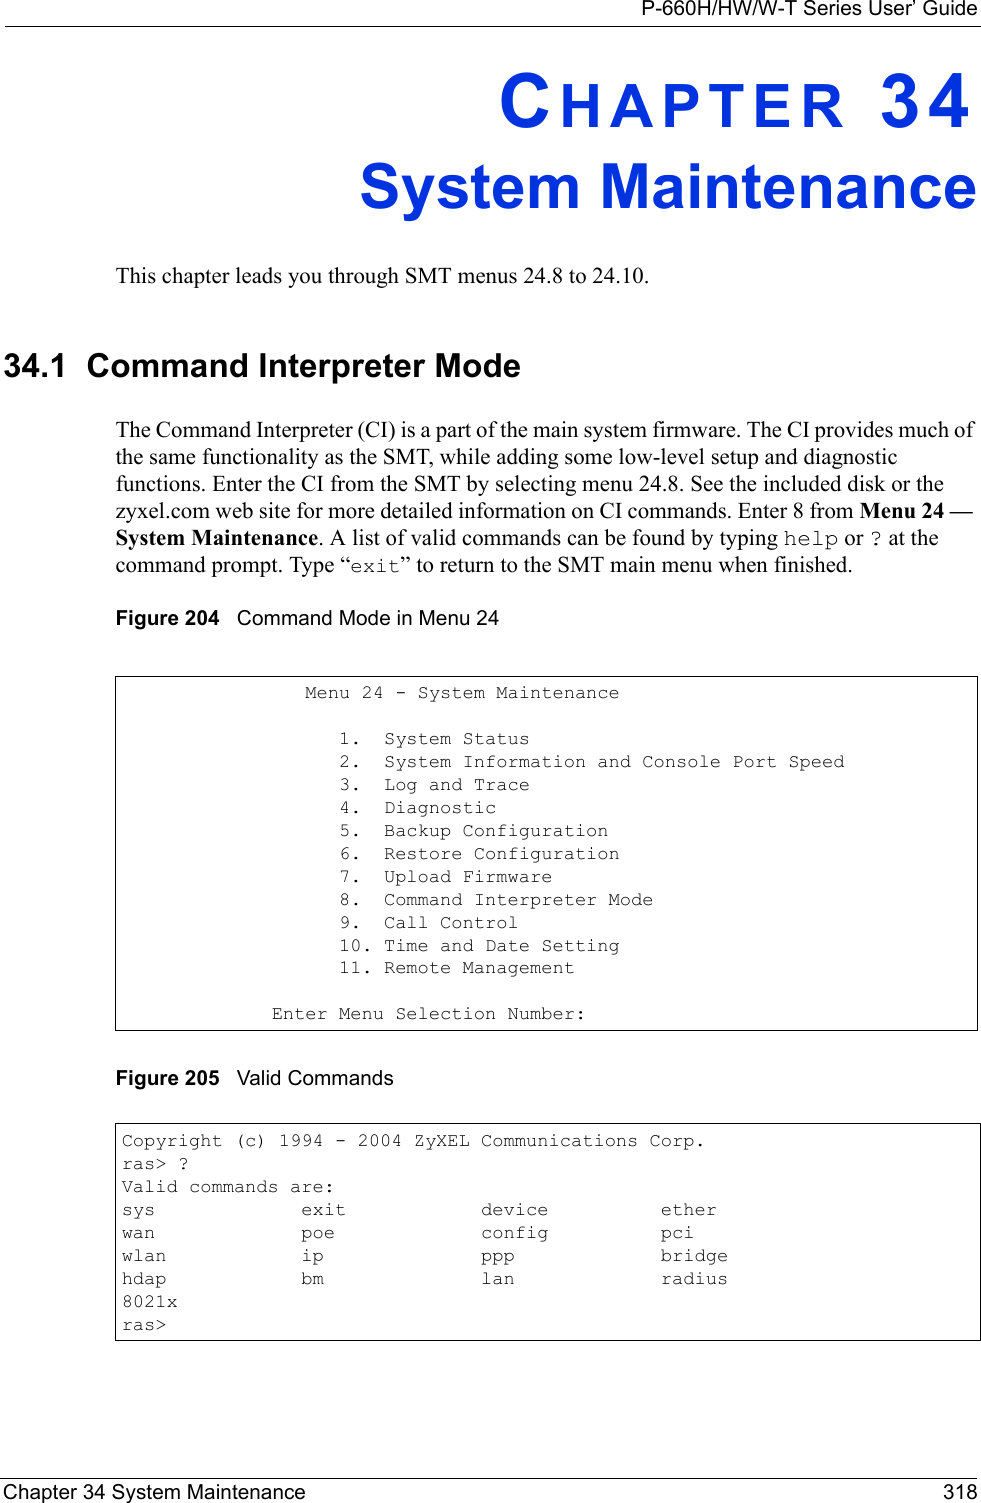 P-660H/HW/W-T Series User’ GuideChapter 34 System Maintenance 318CHAPTER 34System MaintenanceThis chapter leads you through SMT menus 24.8 to 24.10.34.1  Command Interpreter ModeThe Command Interpreter (CI) is a part of the main system firmware. The CI provides much of the same functionality as the SMT, while adding some low-level setup and diagnostic functions. Enter the CI from the SMT by selecting menu 24.8. See the included disk or the zyxel.com web site for more detailed information on CI commands. Enter 8 from Menu 24 — System Maintenance. A list of valid commands can be found by typing help or ? at the command prompt. Type “exit” to return to the SMT main menu when finished. Figure 204   Command Mode in Menu 24Figure 205   Valid Commands   Menu 24 - System Maintenance      1.  System Status      2.  System Information and Console Port Speed      3.  Log and Trace      4.  Diagnostic      5.  Backup Configuration      6.  Restore Configuration      7.  Upload Firmware      8.  Command Interpreter Mode      9.  Call Control      10. Time and Date Setting      11. Remote ManagementEnter Menu Selection Number:Copyright (c) 1994 - 2004 ZyXEL Communications Corp.ras&gt; ?Valid commands are:sys             exit            device          etherwan             poe             config          pciwlan            ip              ppp             bridgehdap            bm              lan             radius8021xras&gt;